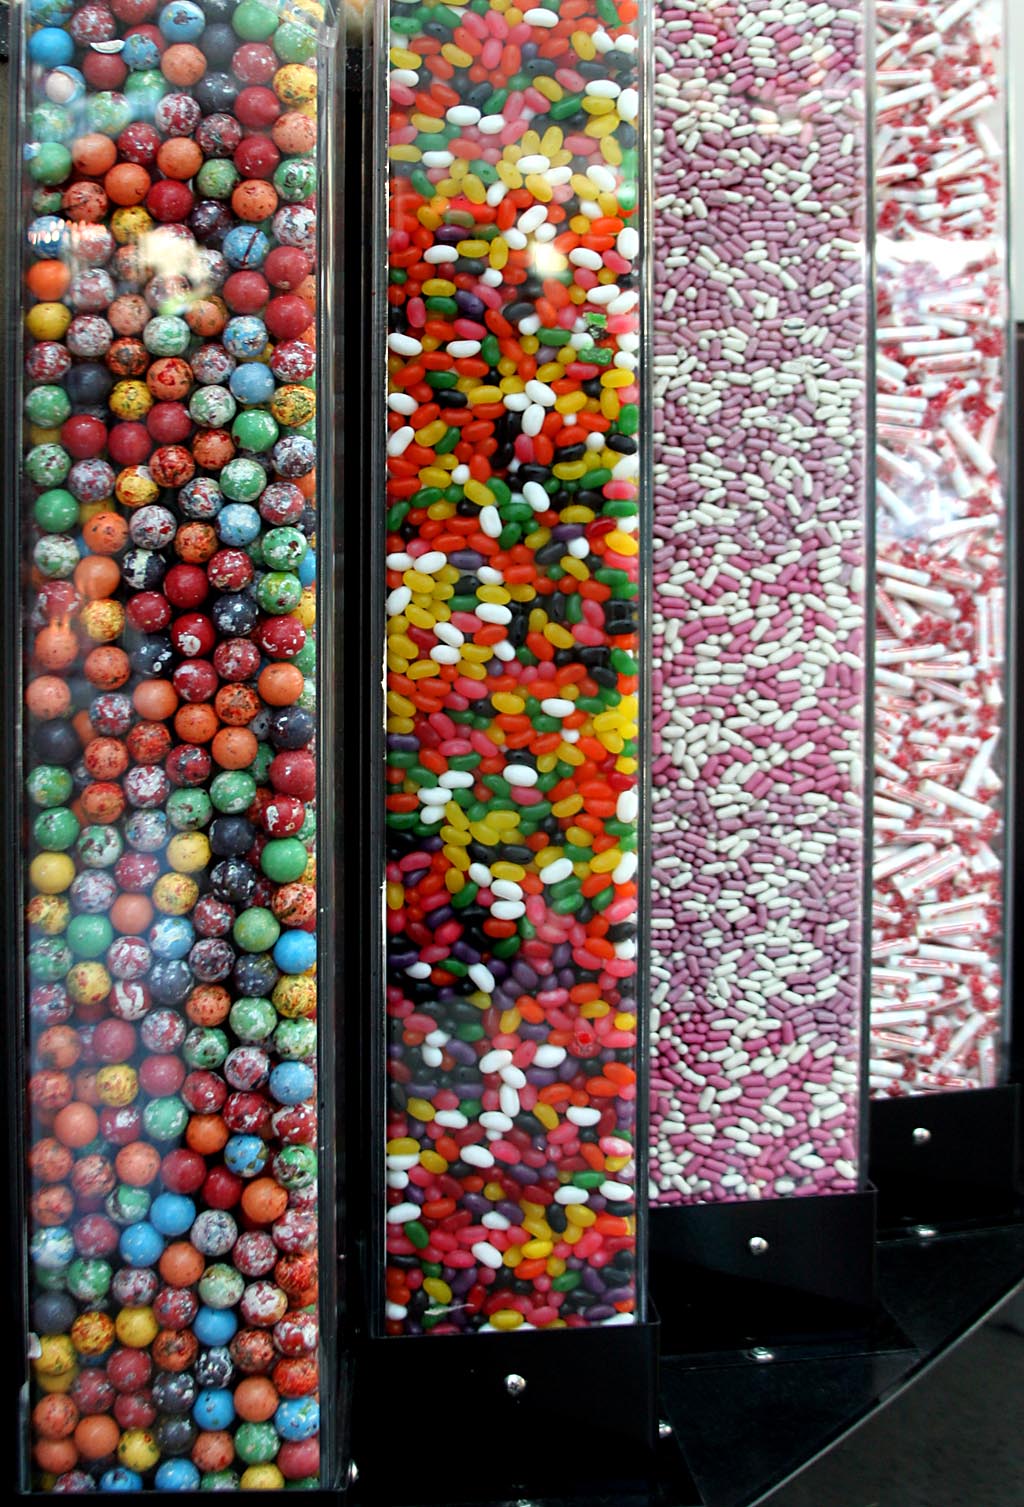 Candy - Portland airport